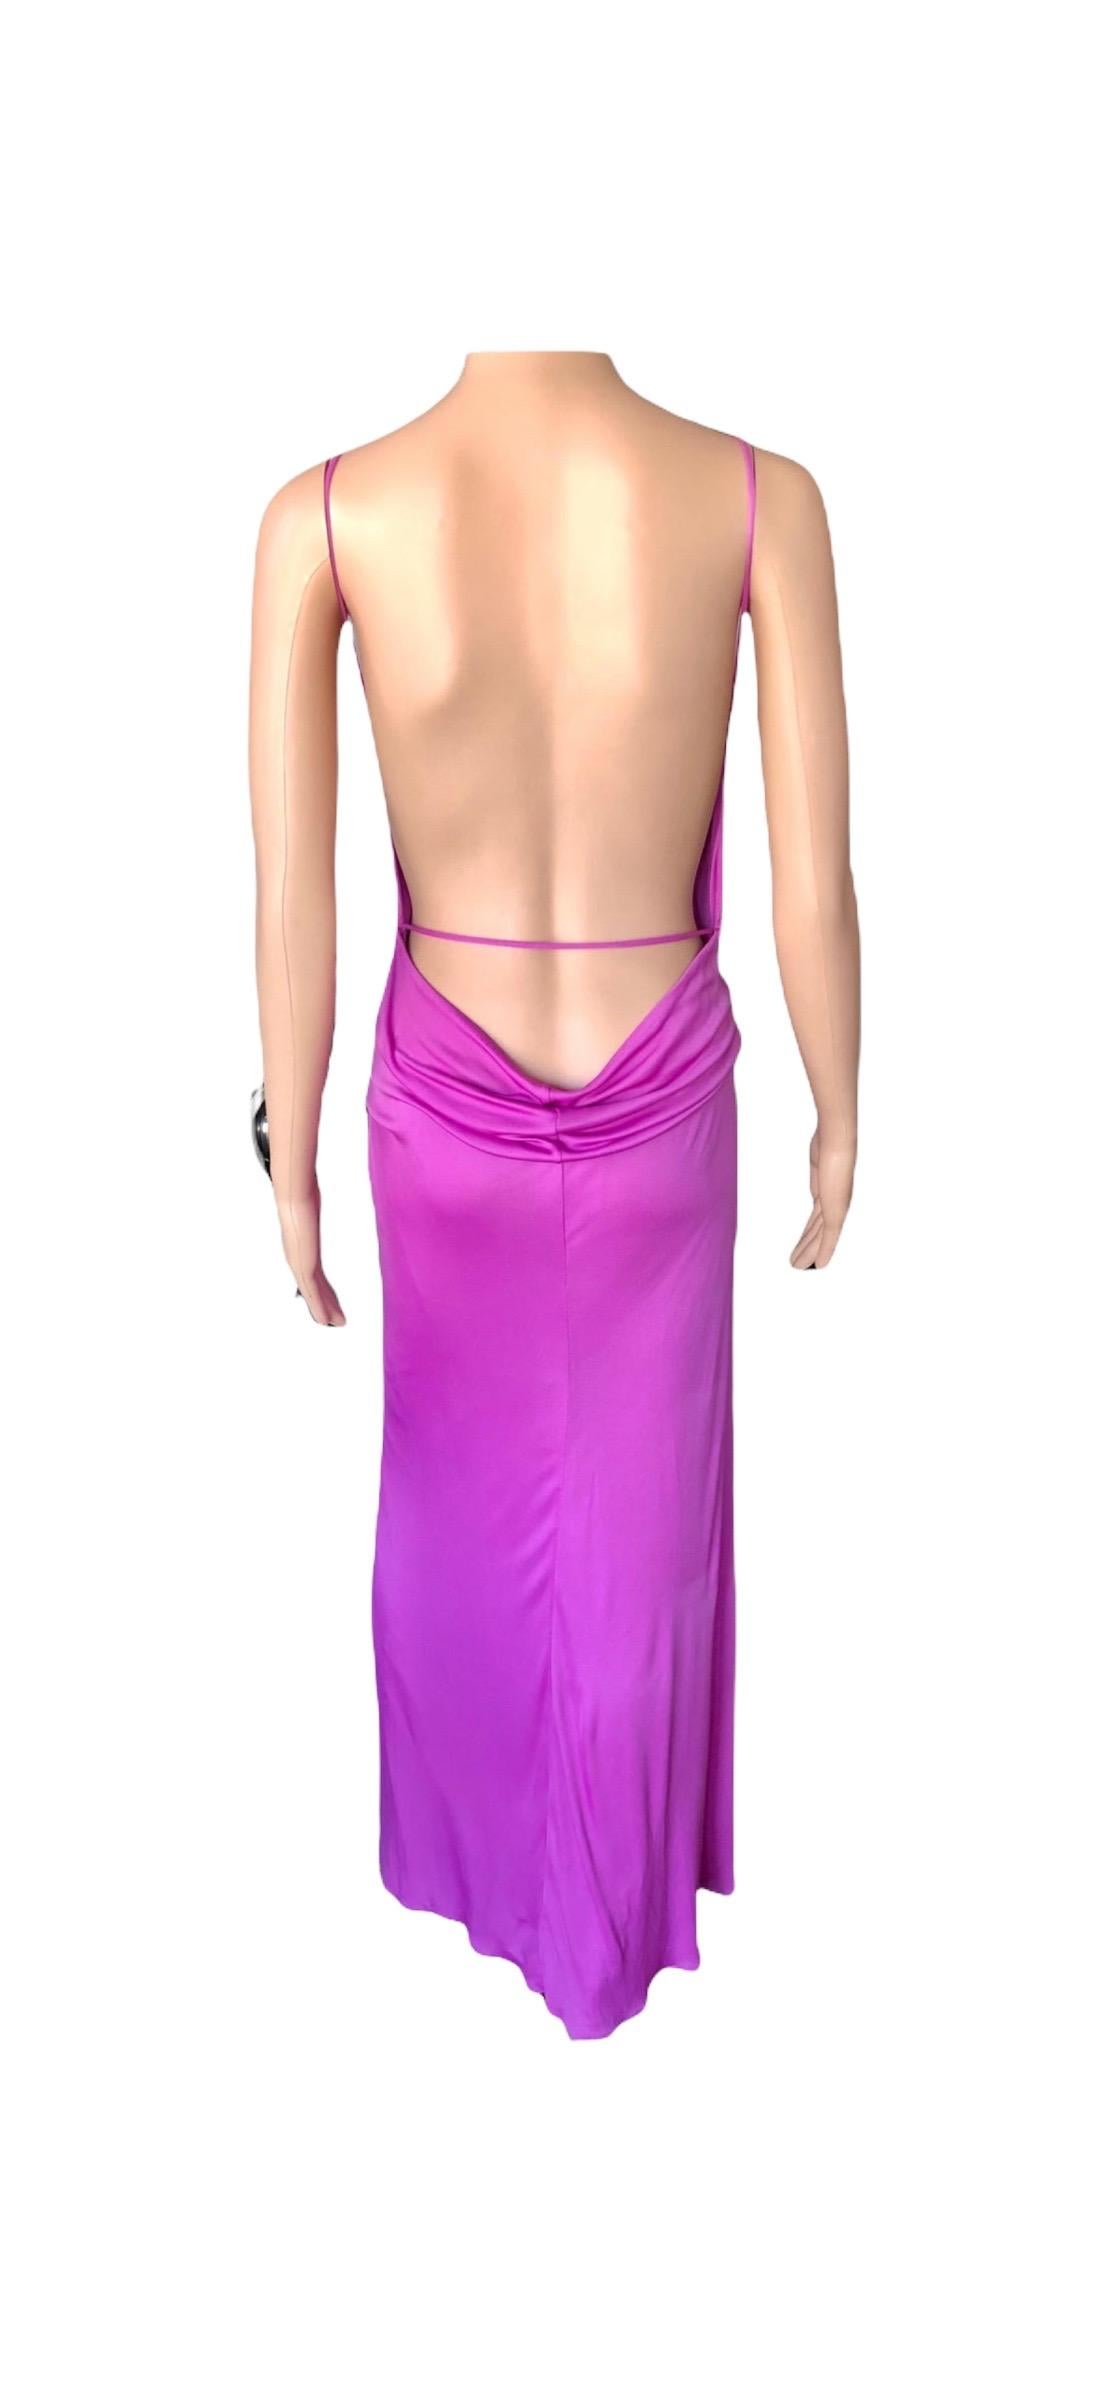 Gianni Versace S/S 1999 Vintage Backless High Slit Evening Dress Gown In Good Condition For Sale In Naples, FL